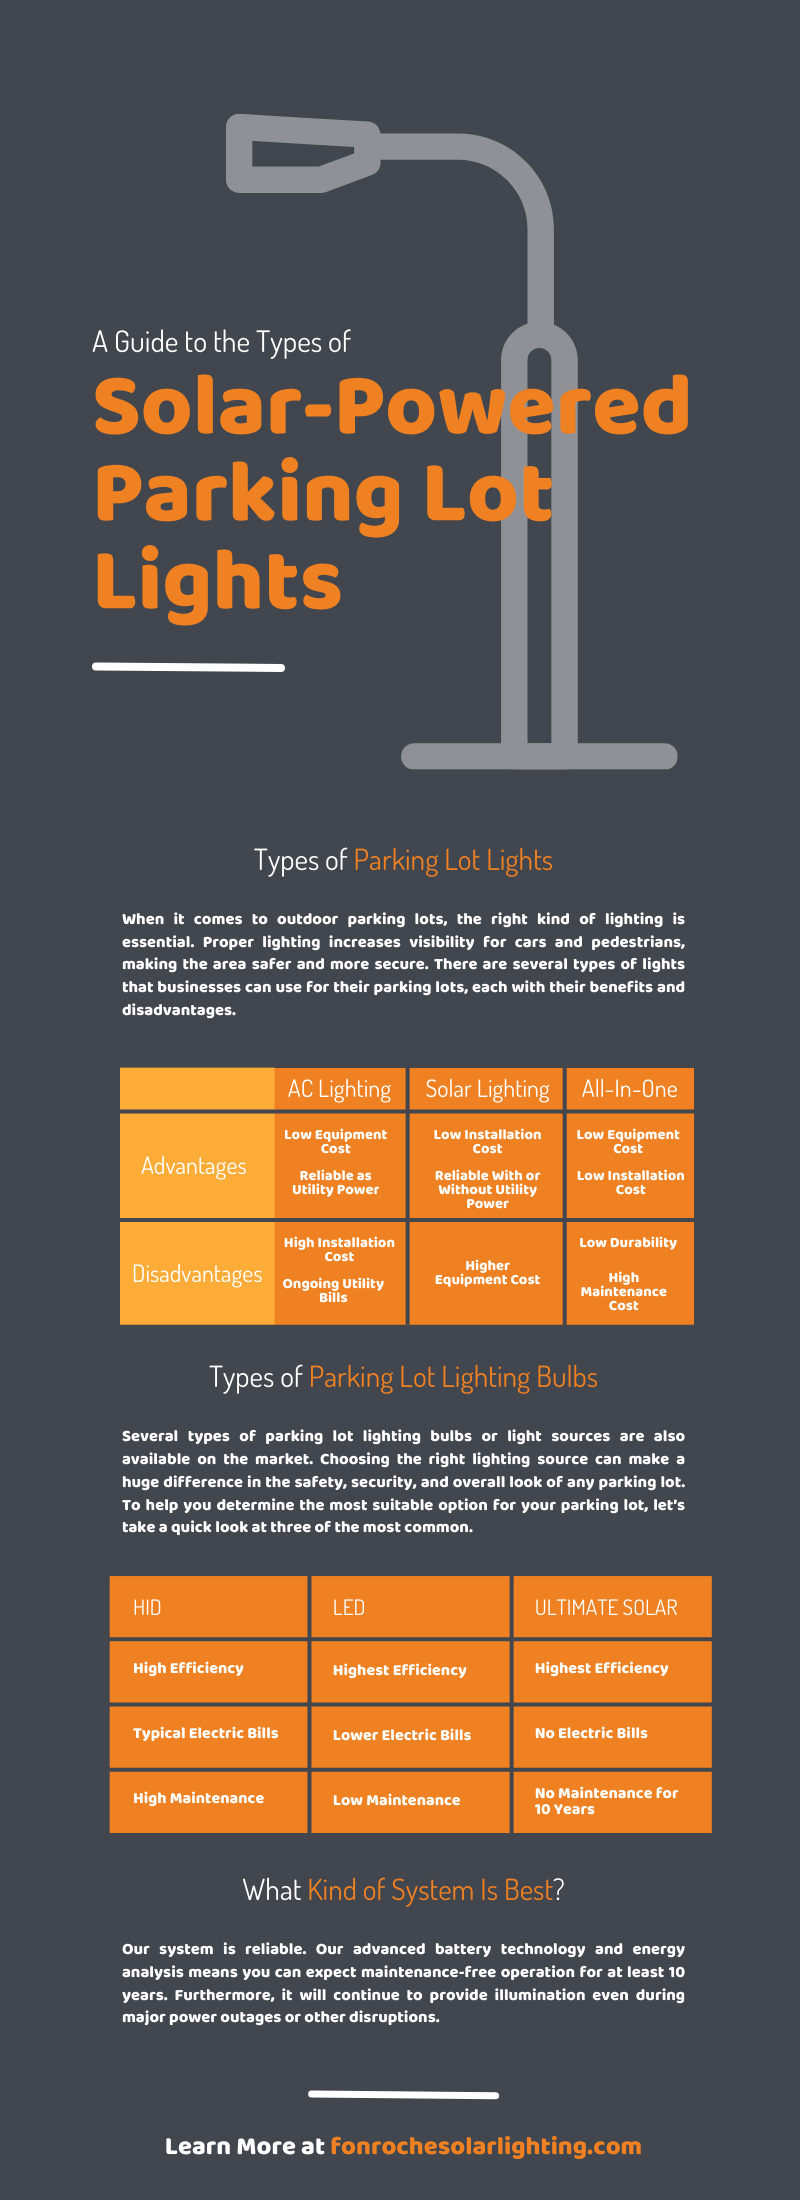 A Guide to the Types of Solar-Powered Parking Lot Lights